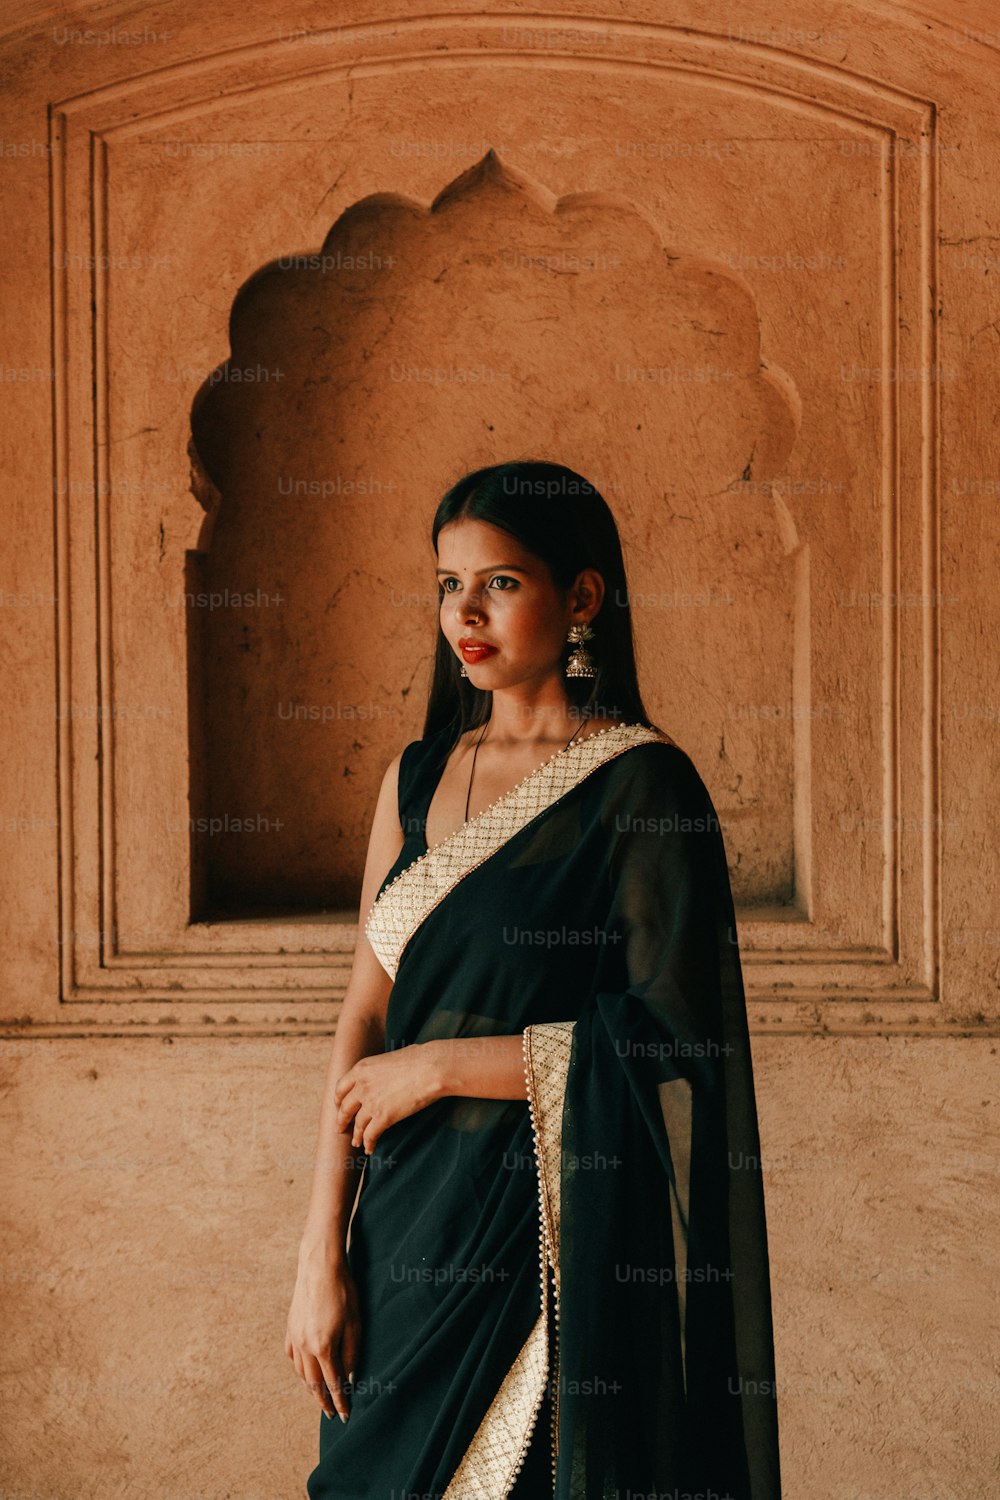 a woman in a black and white sari